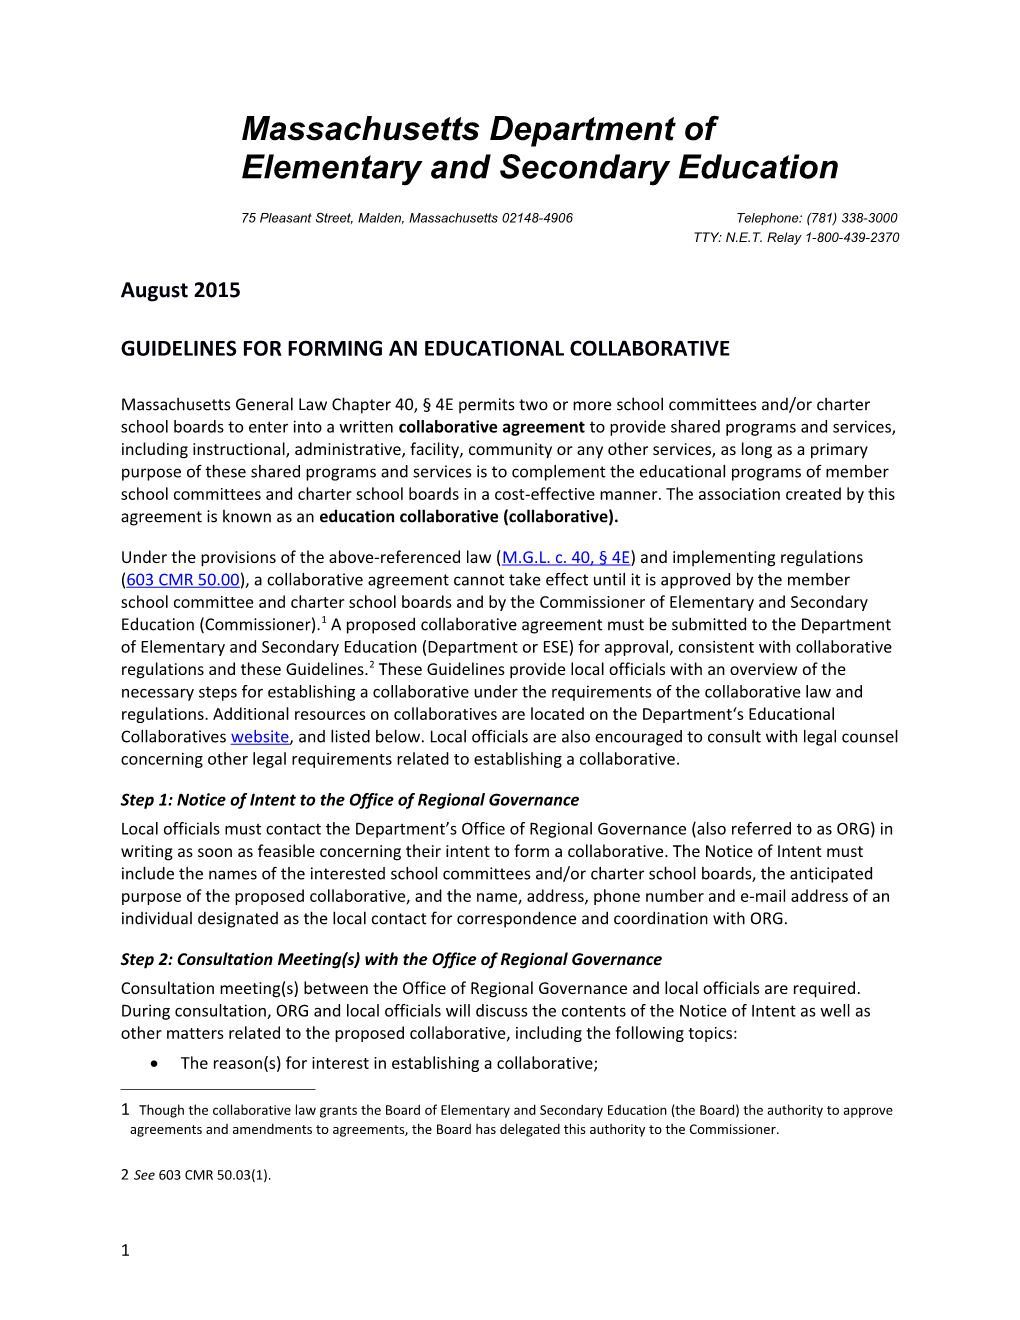 Guidelines for Forming an Educational Collaborative